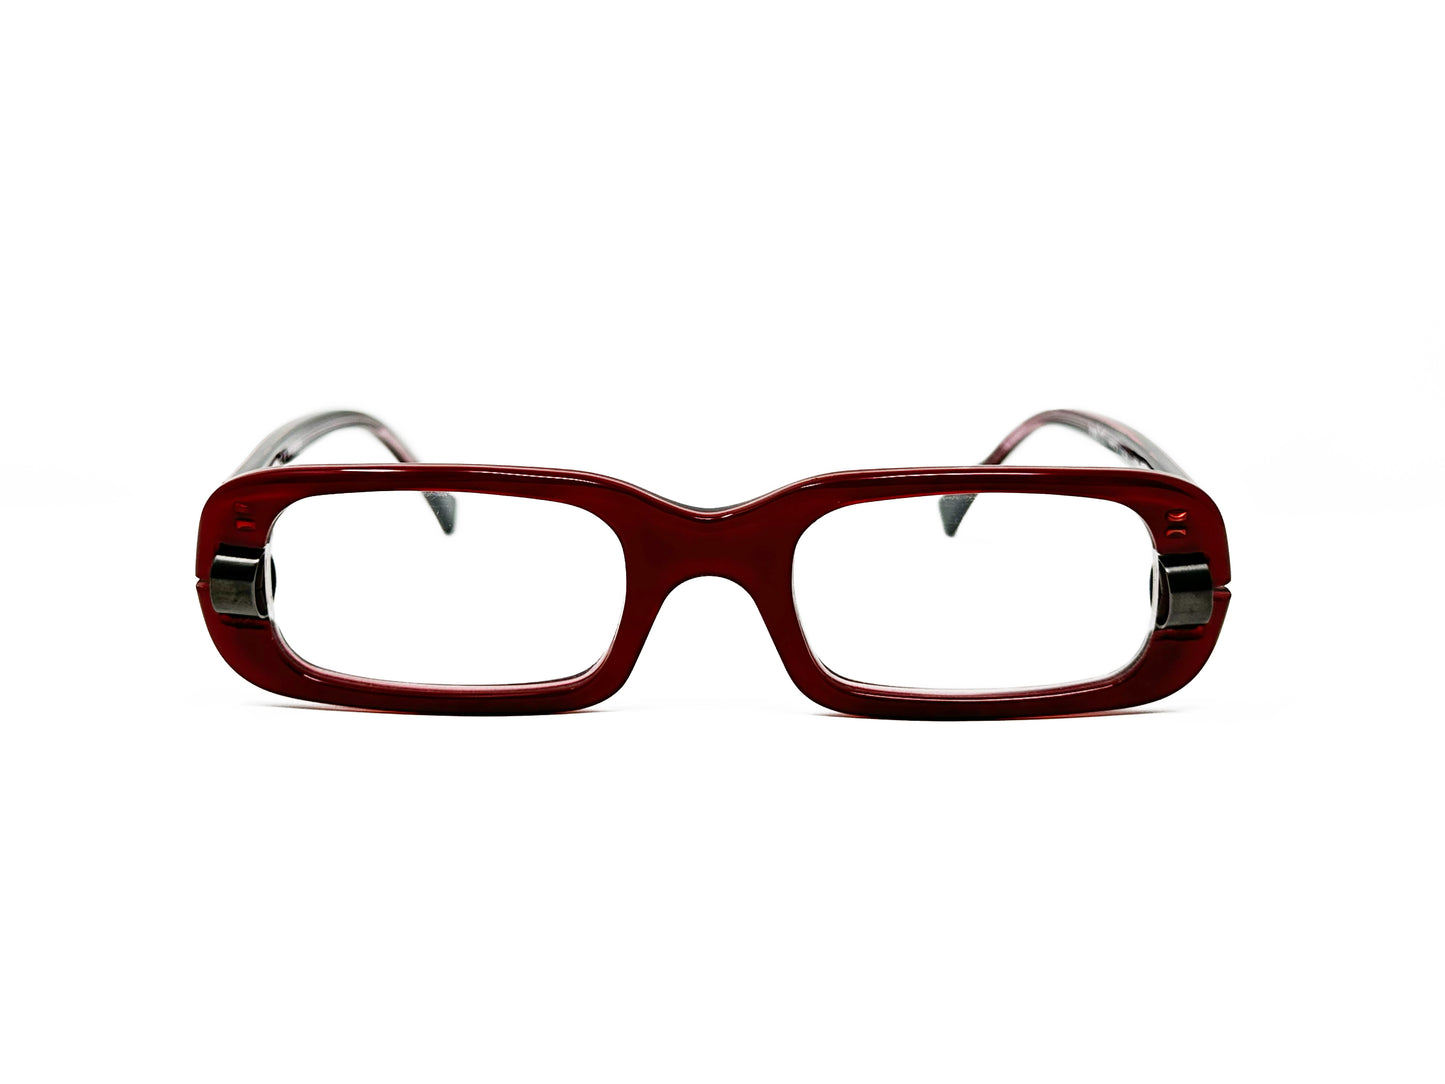 Frost bubble-rectangular, acetate, optical frames. Model: Ring. Color: C177 - Dark Red. Front view.